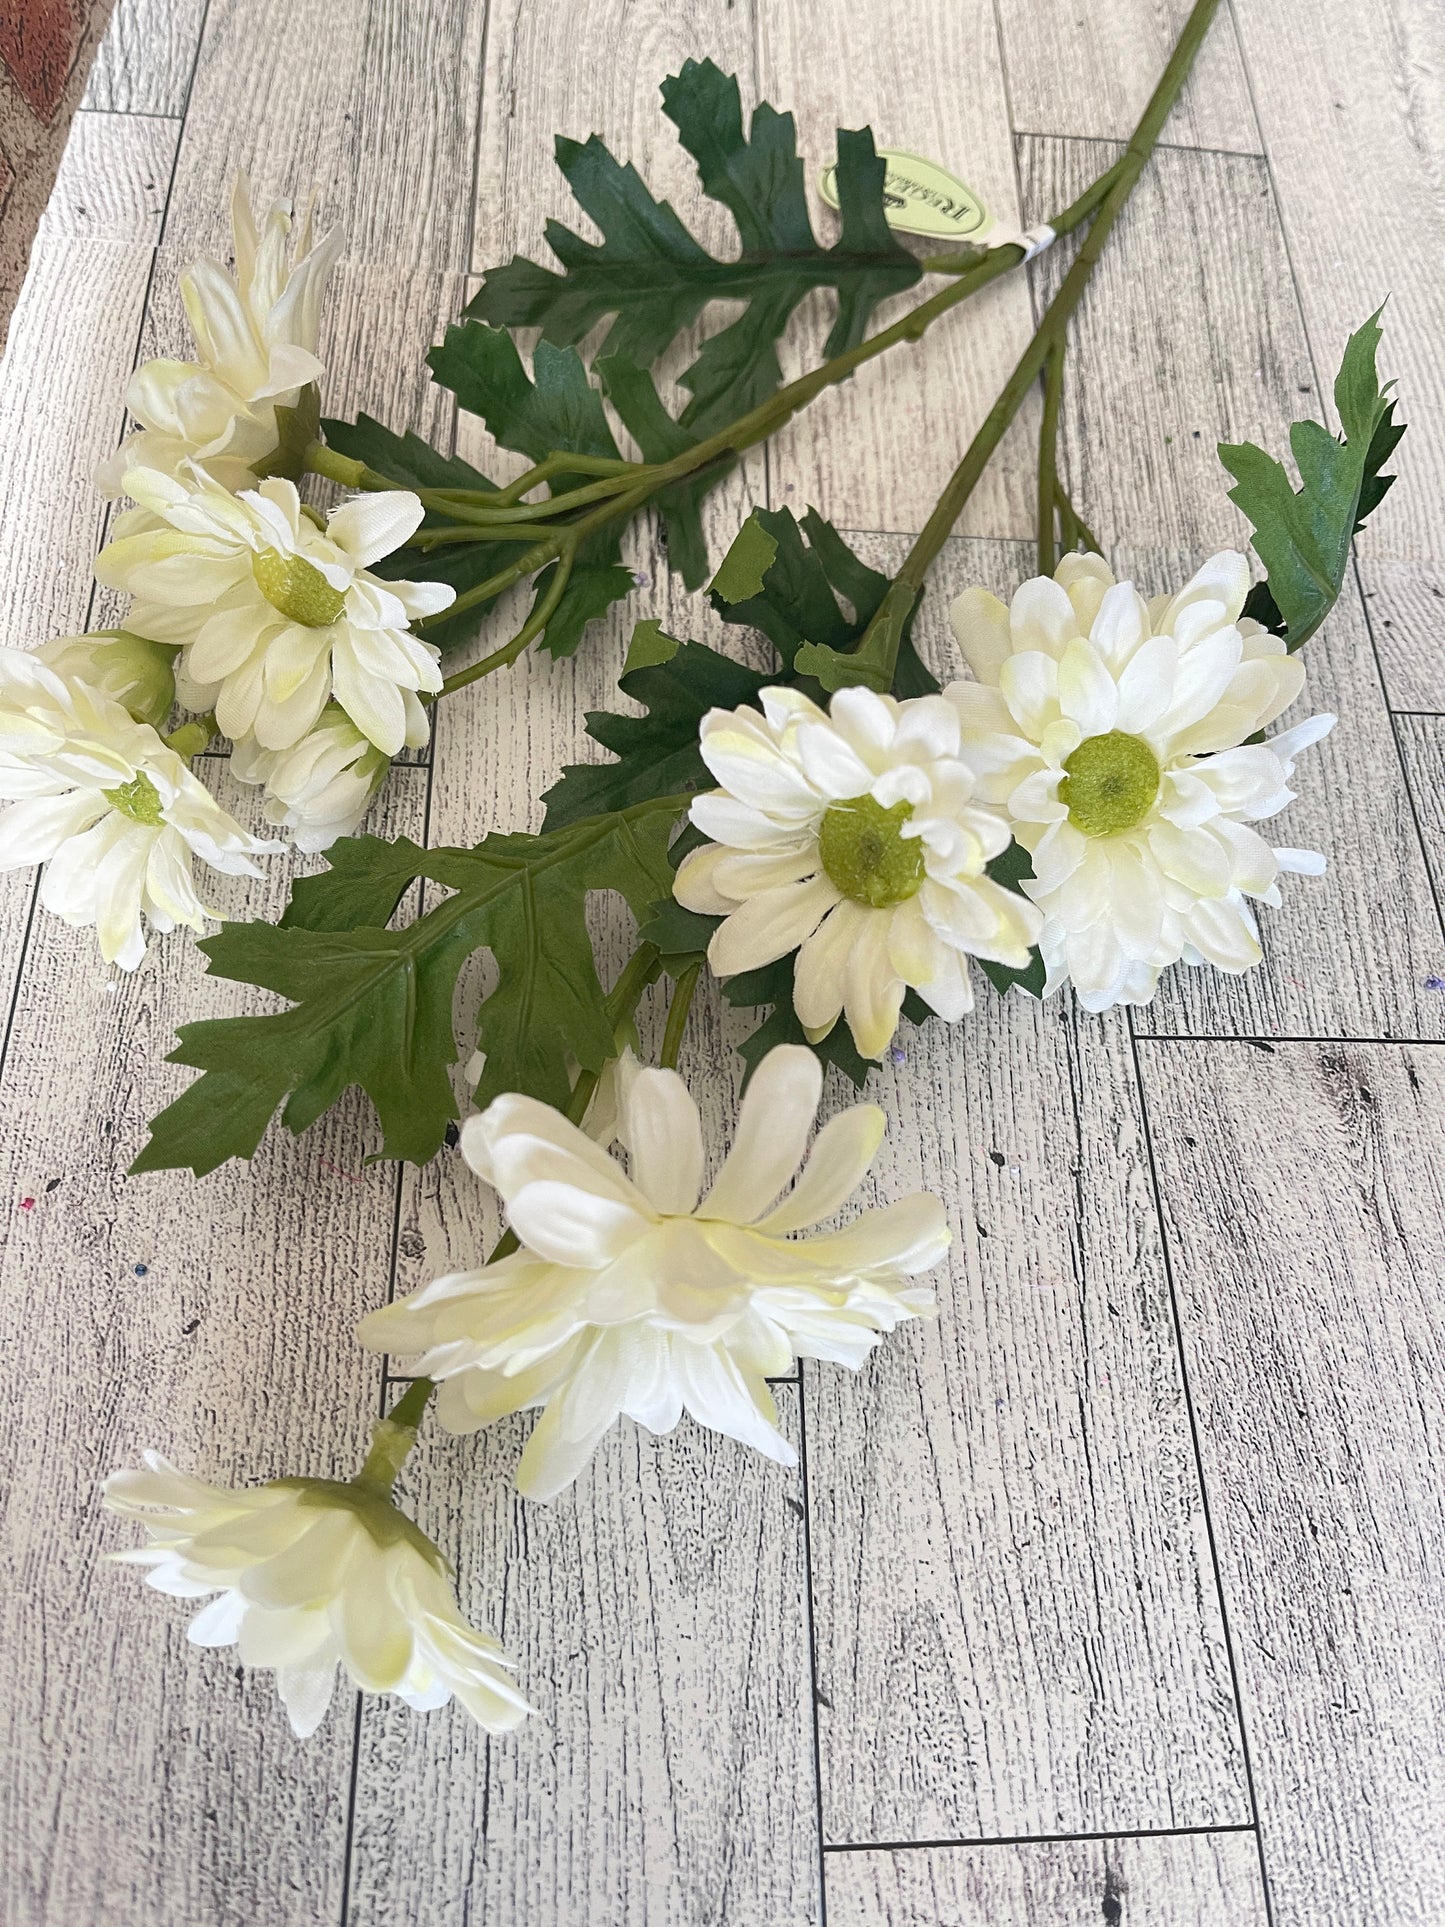 White Daisy Floral Bunch, Greenery, Spring Floral Supplies, Wreath Greenery, Floral Greenery, Picks, Craft Supply, Decor